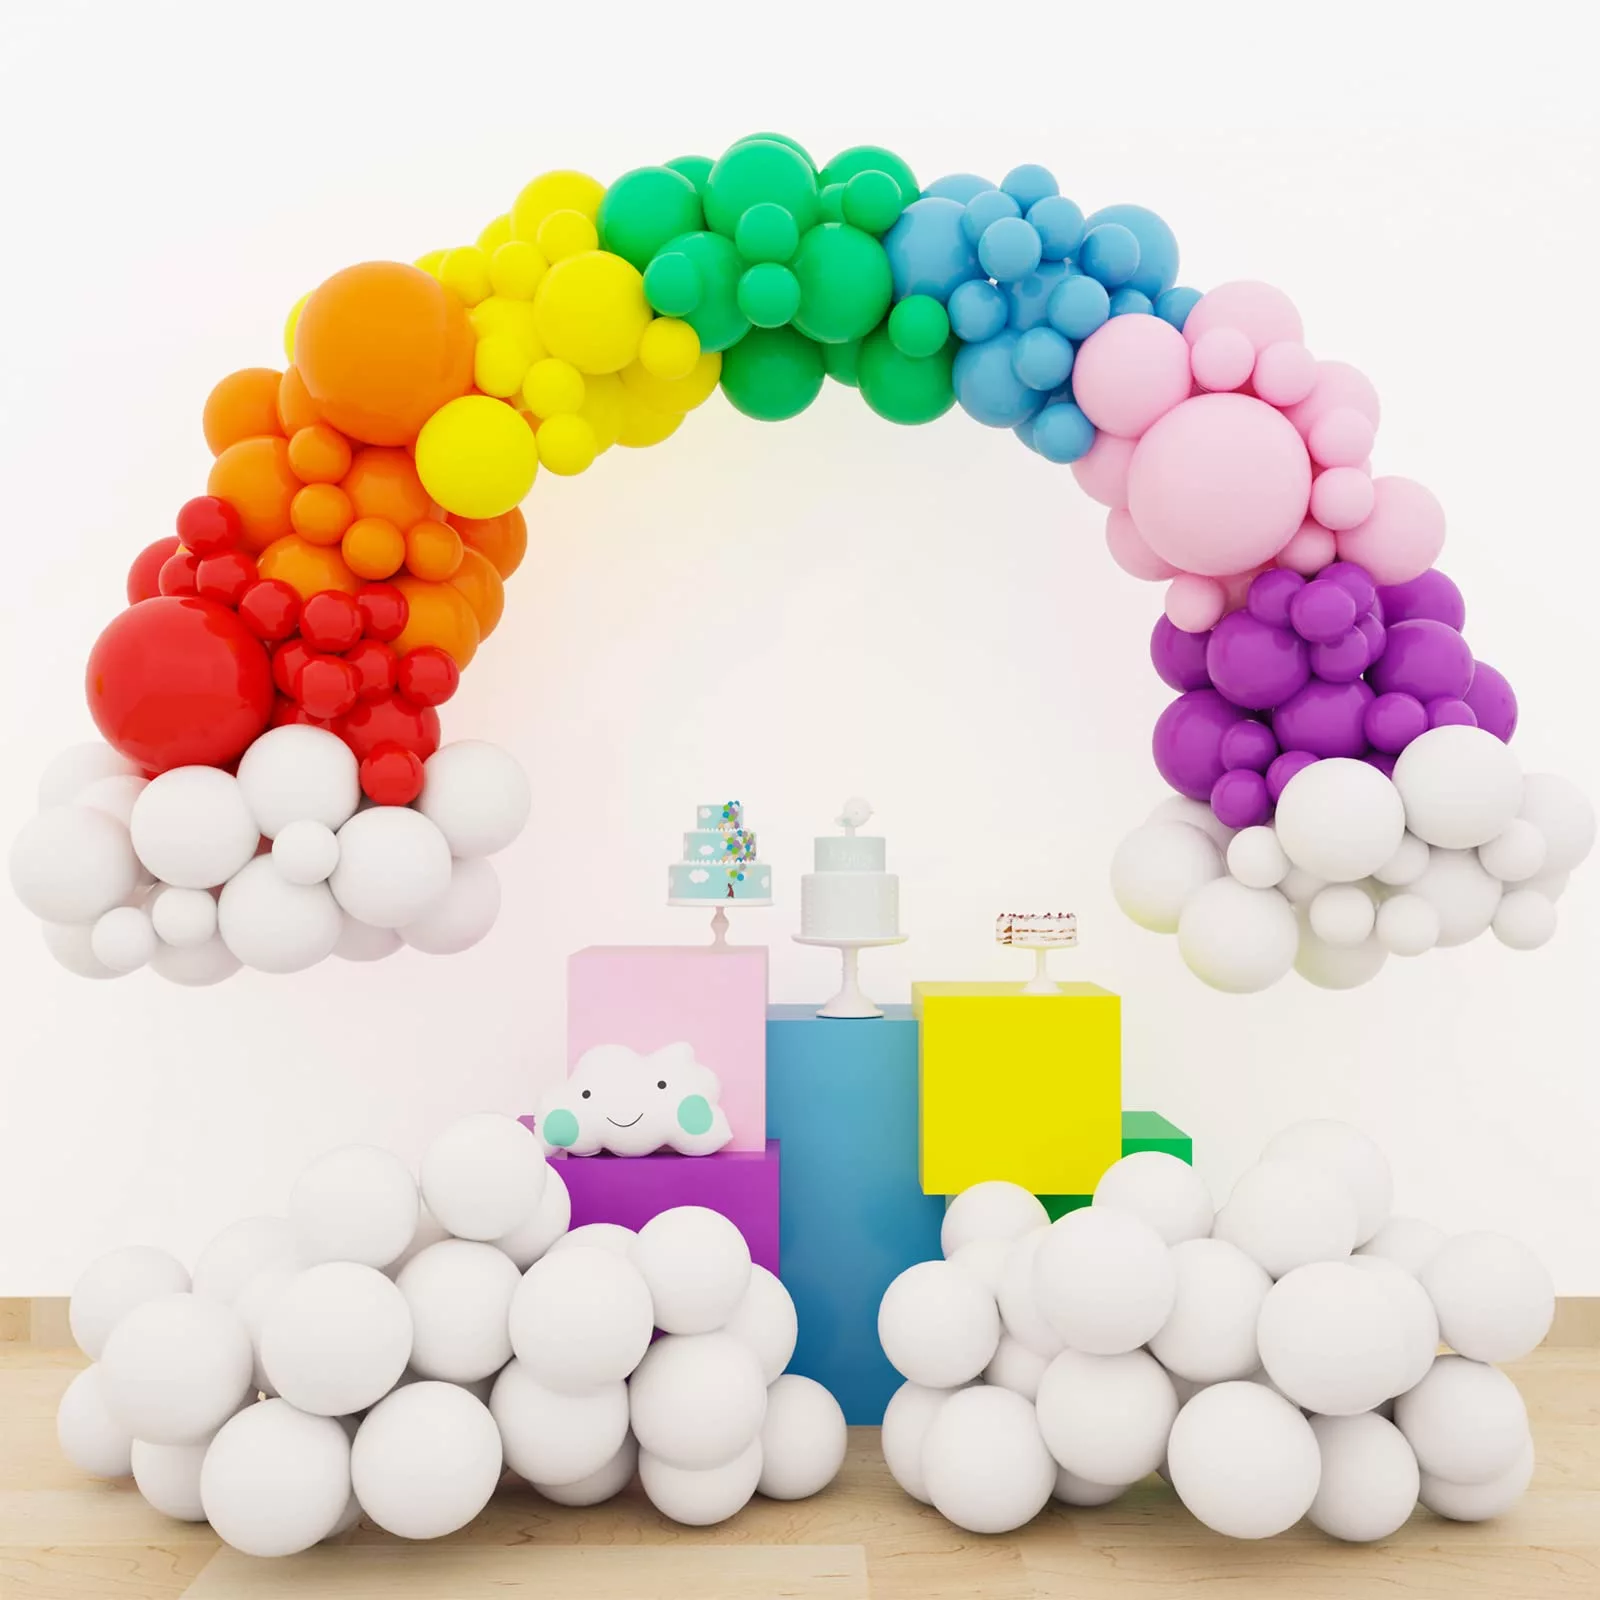 How to Make a Balloon Archway